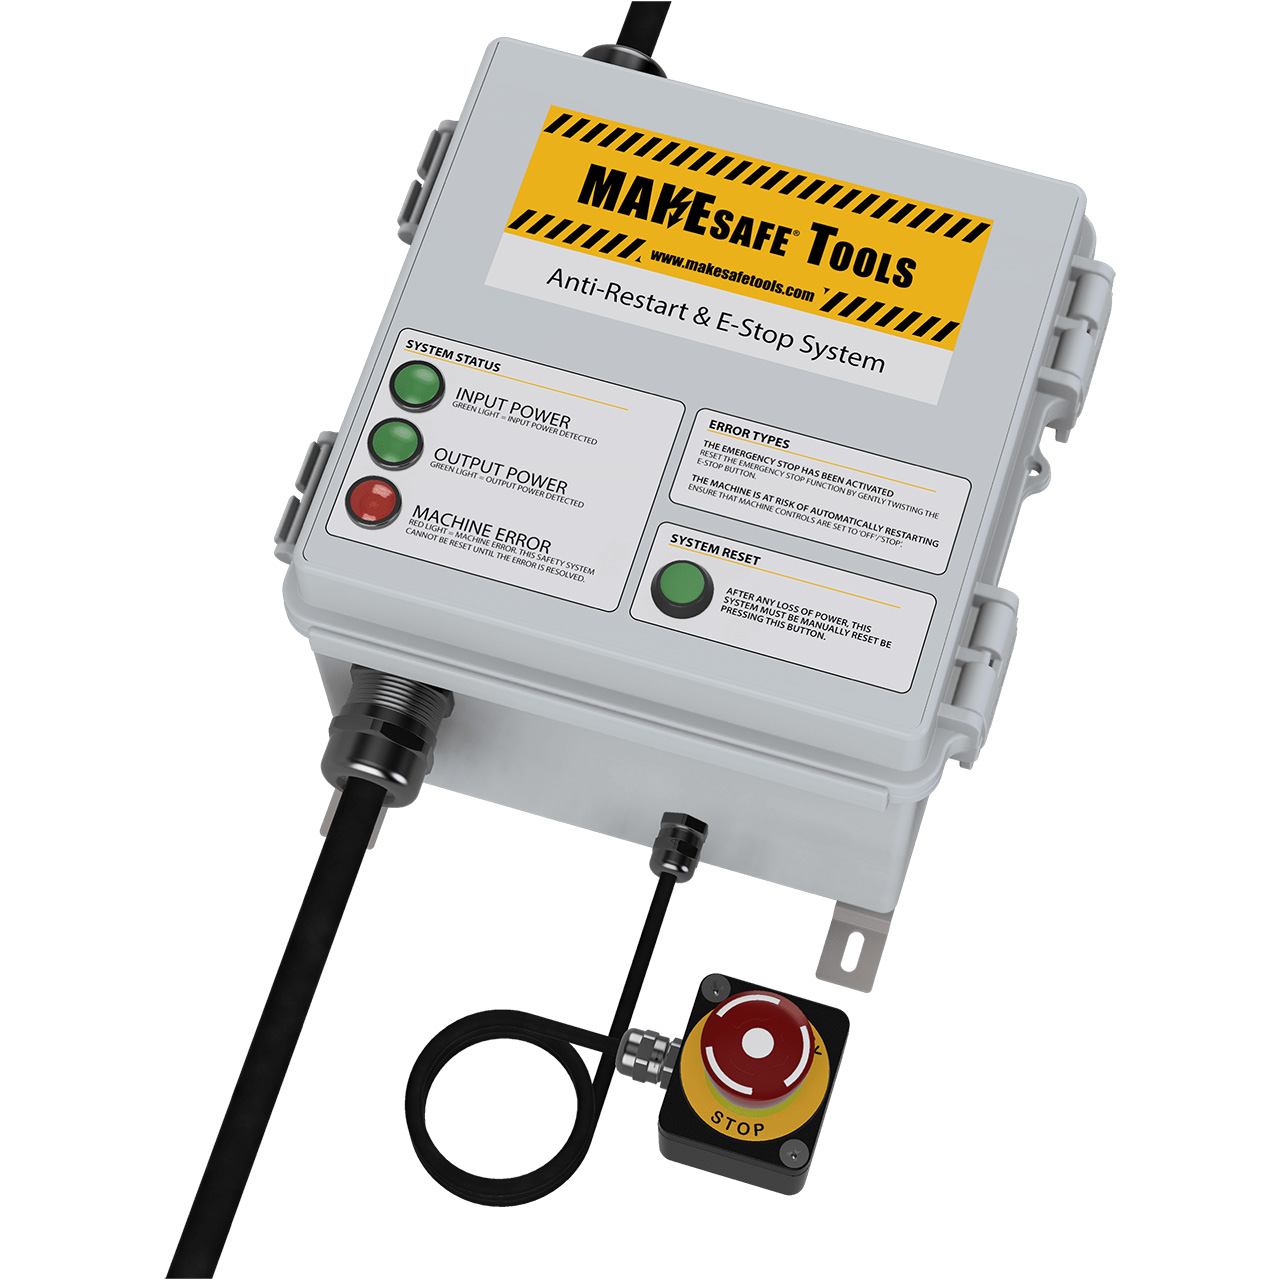 MAKESafe Industrial & E-Stop System, UL Listed, 600V, 3-Phase, 10 HP IRE-V600-P3-HP10 Penn Tool Inc